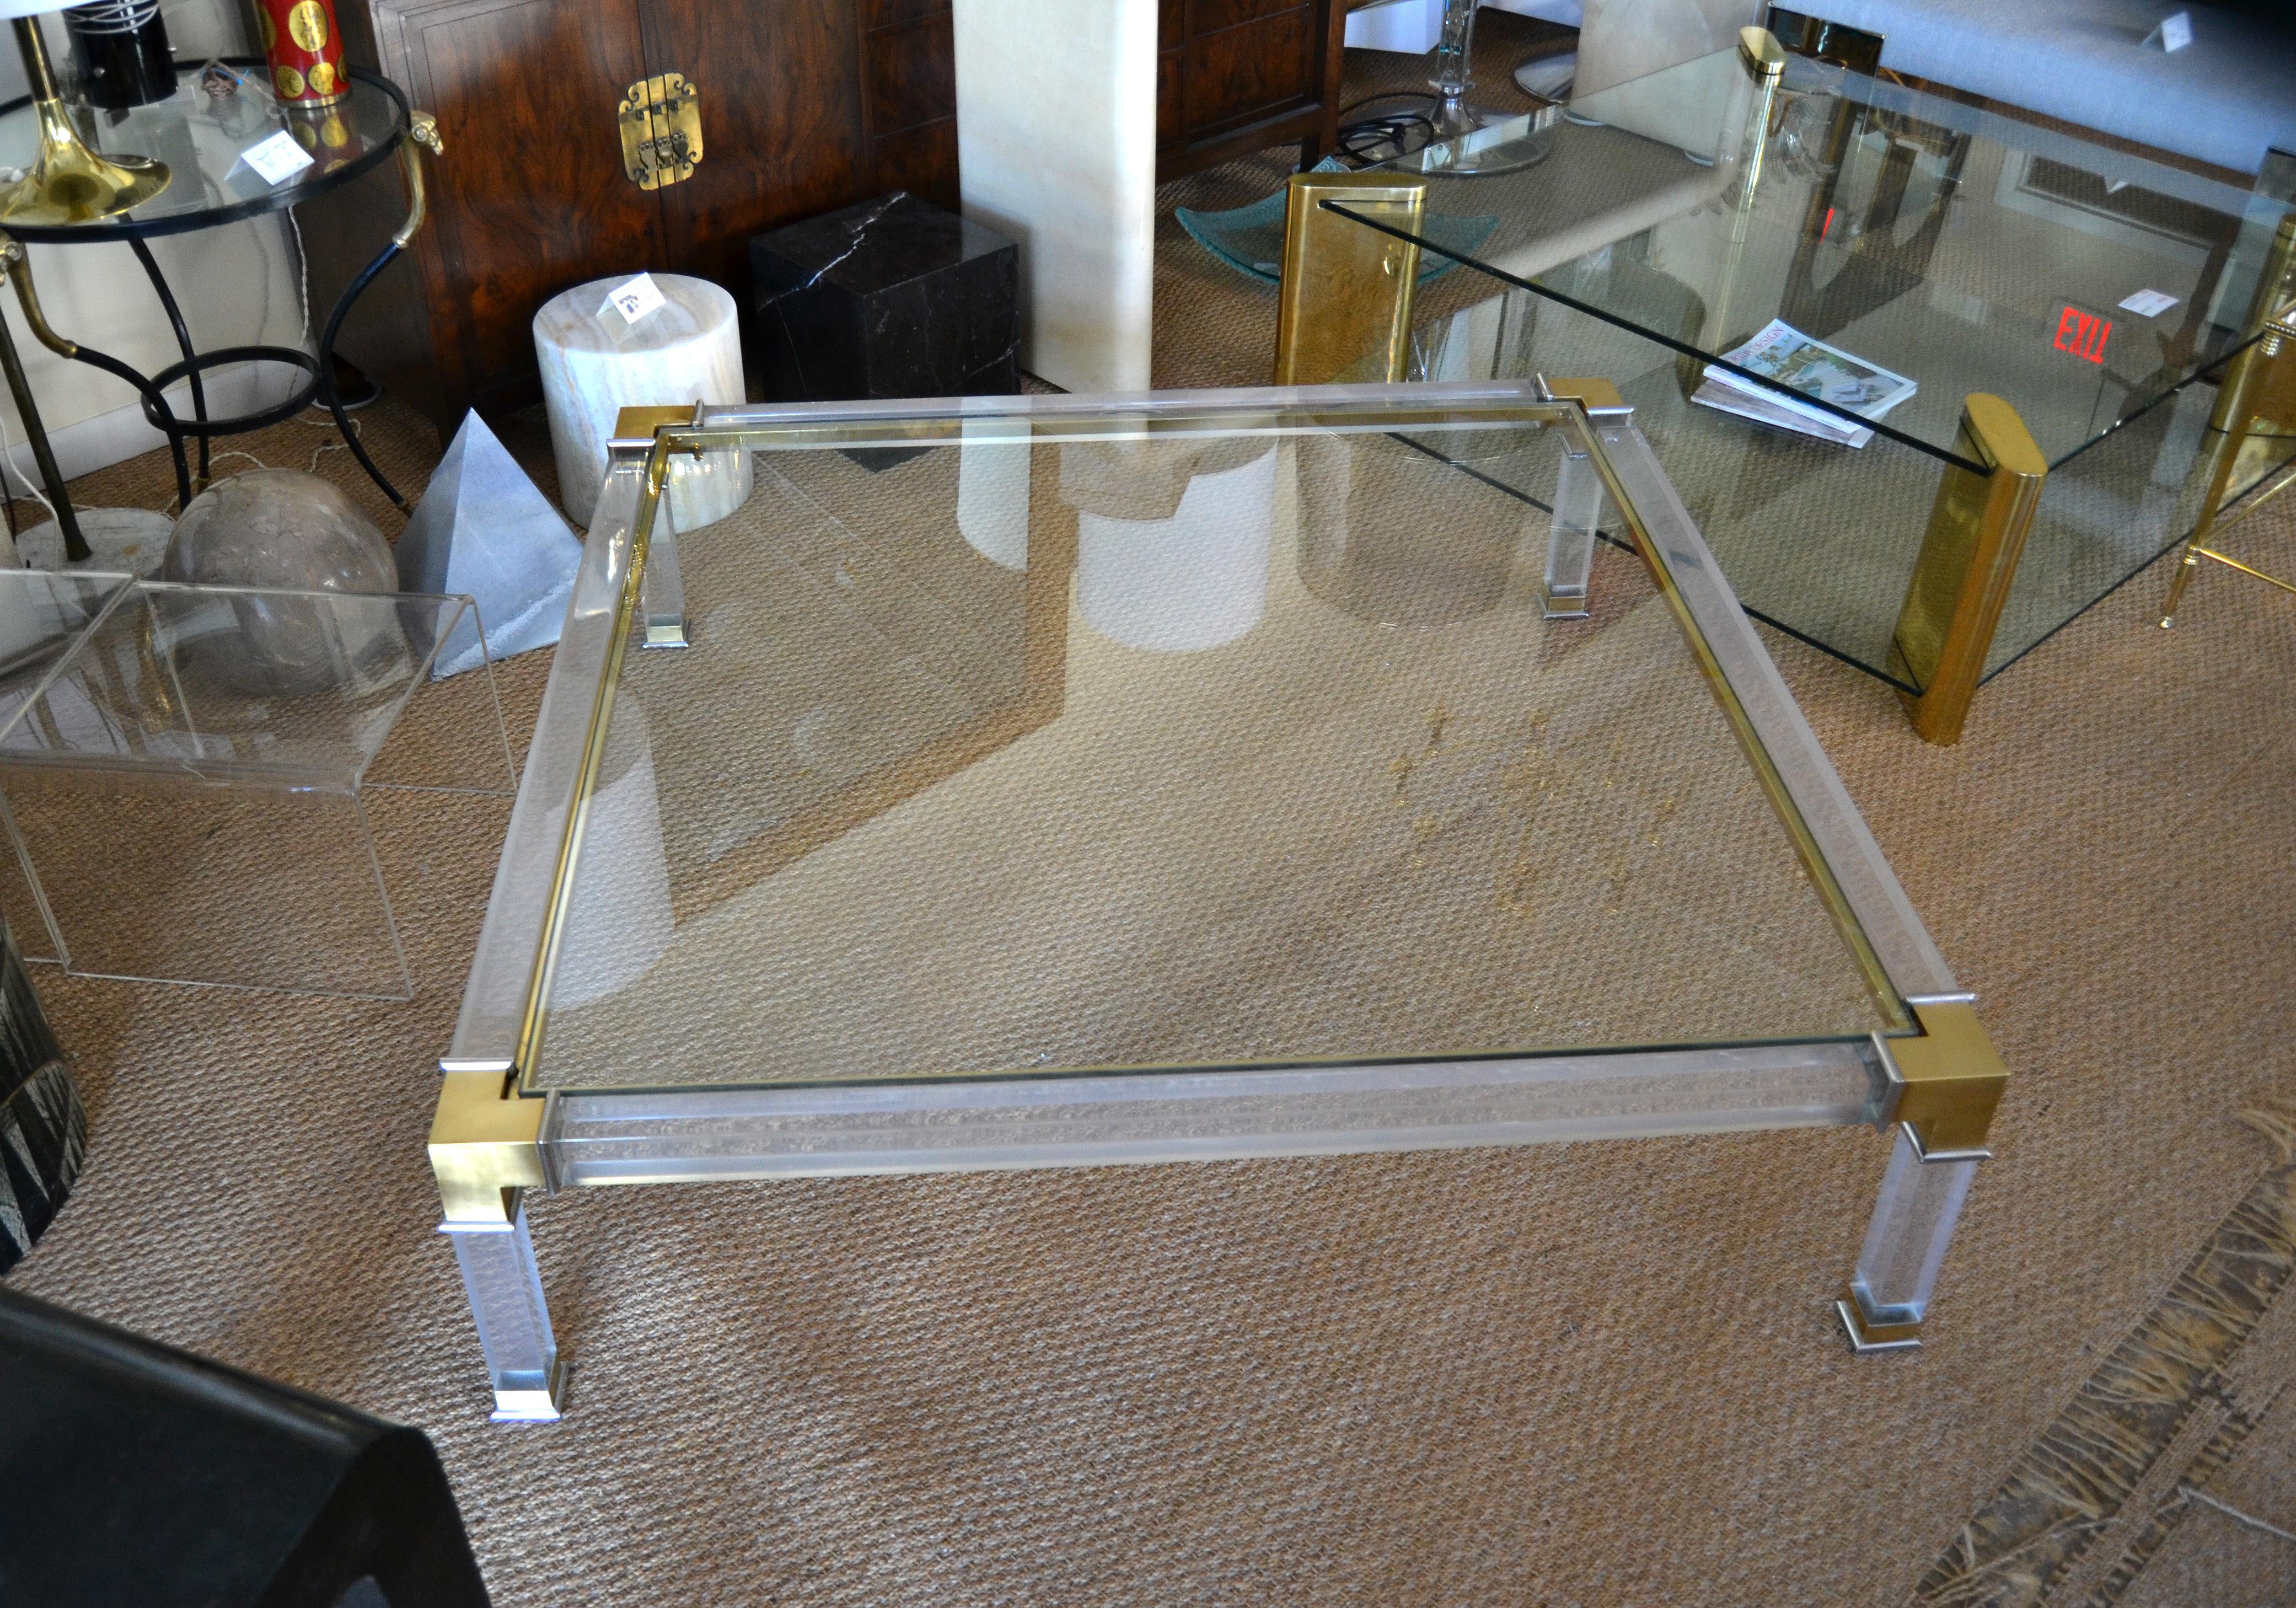 Early monumental lovely Hollywood Regency square acrylic, bronze glass coffee table with chrome details by Charles Hollis Jones.
Acrylic frames constructed with sturdy and durable bronze corners supported by chrome details.
Features a clear glass